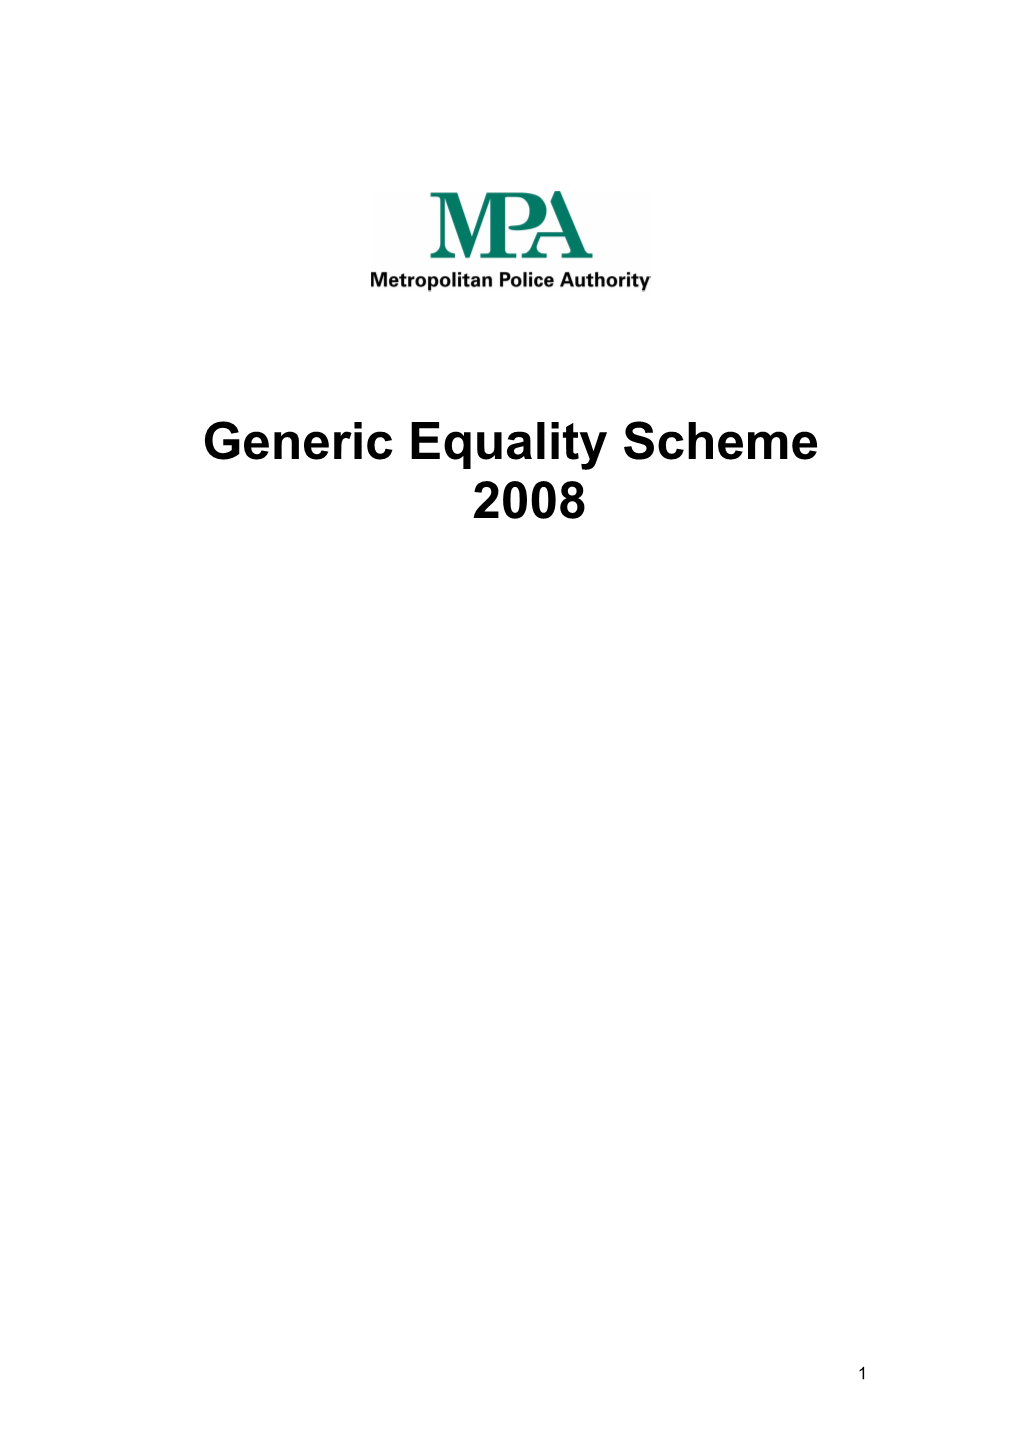 MPA Generic Equality Scheme Disability Action Plan